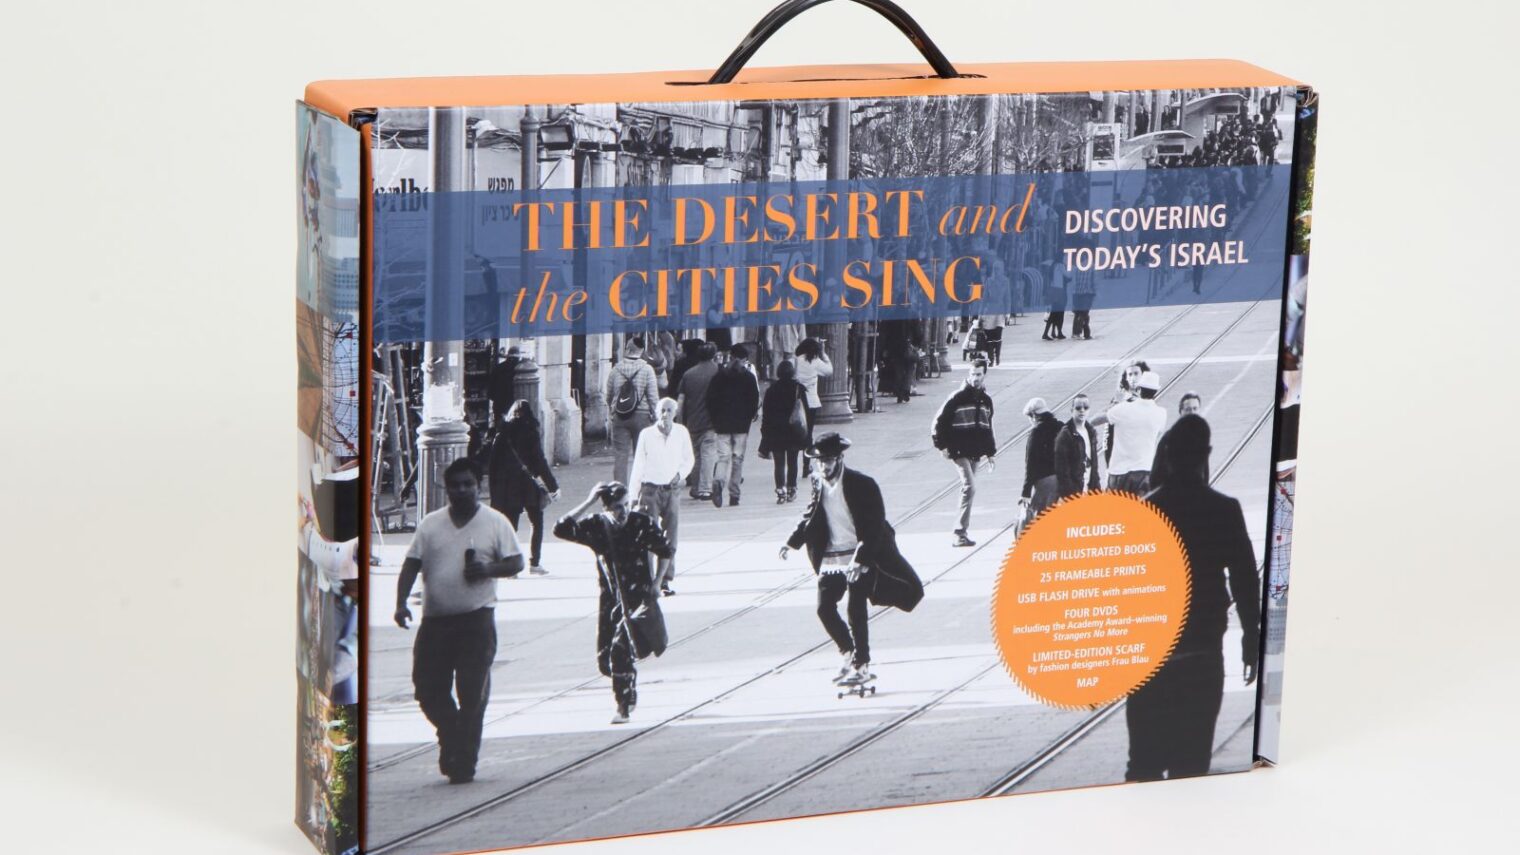 “The Desert and the Cities Sing: Discovering Today’s Israel,” by Lin Arison and Diana C. Stoll. Photo: courtesy